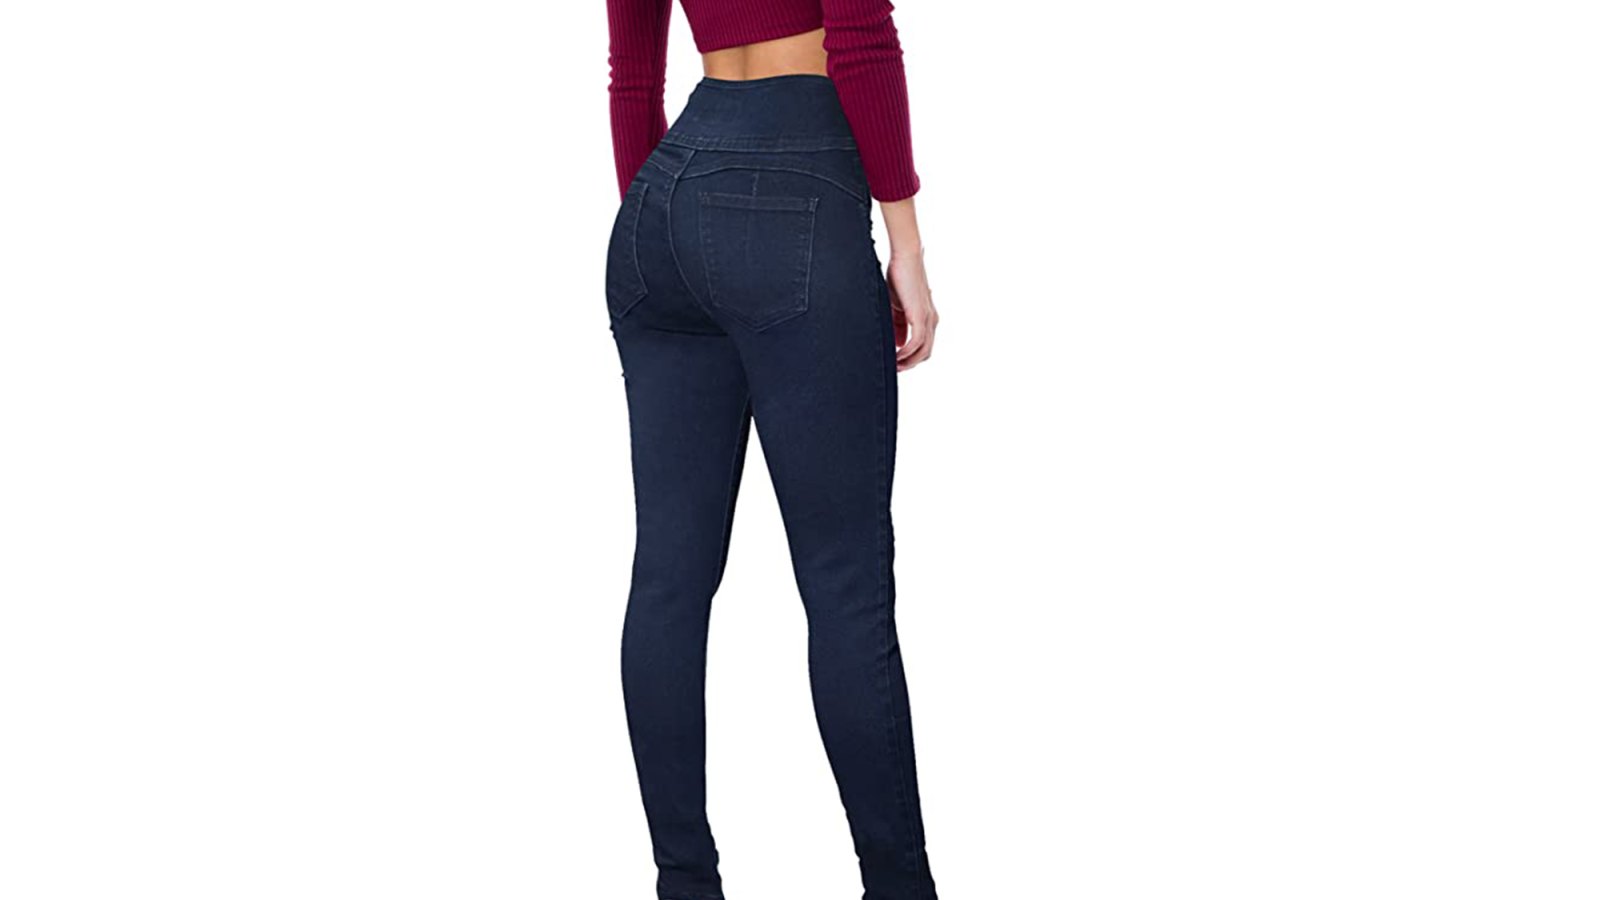 butt lifting jeans